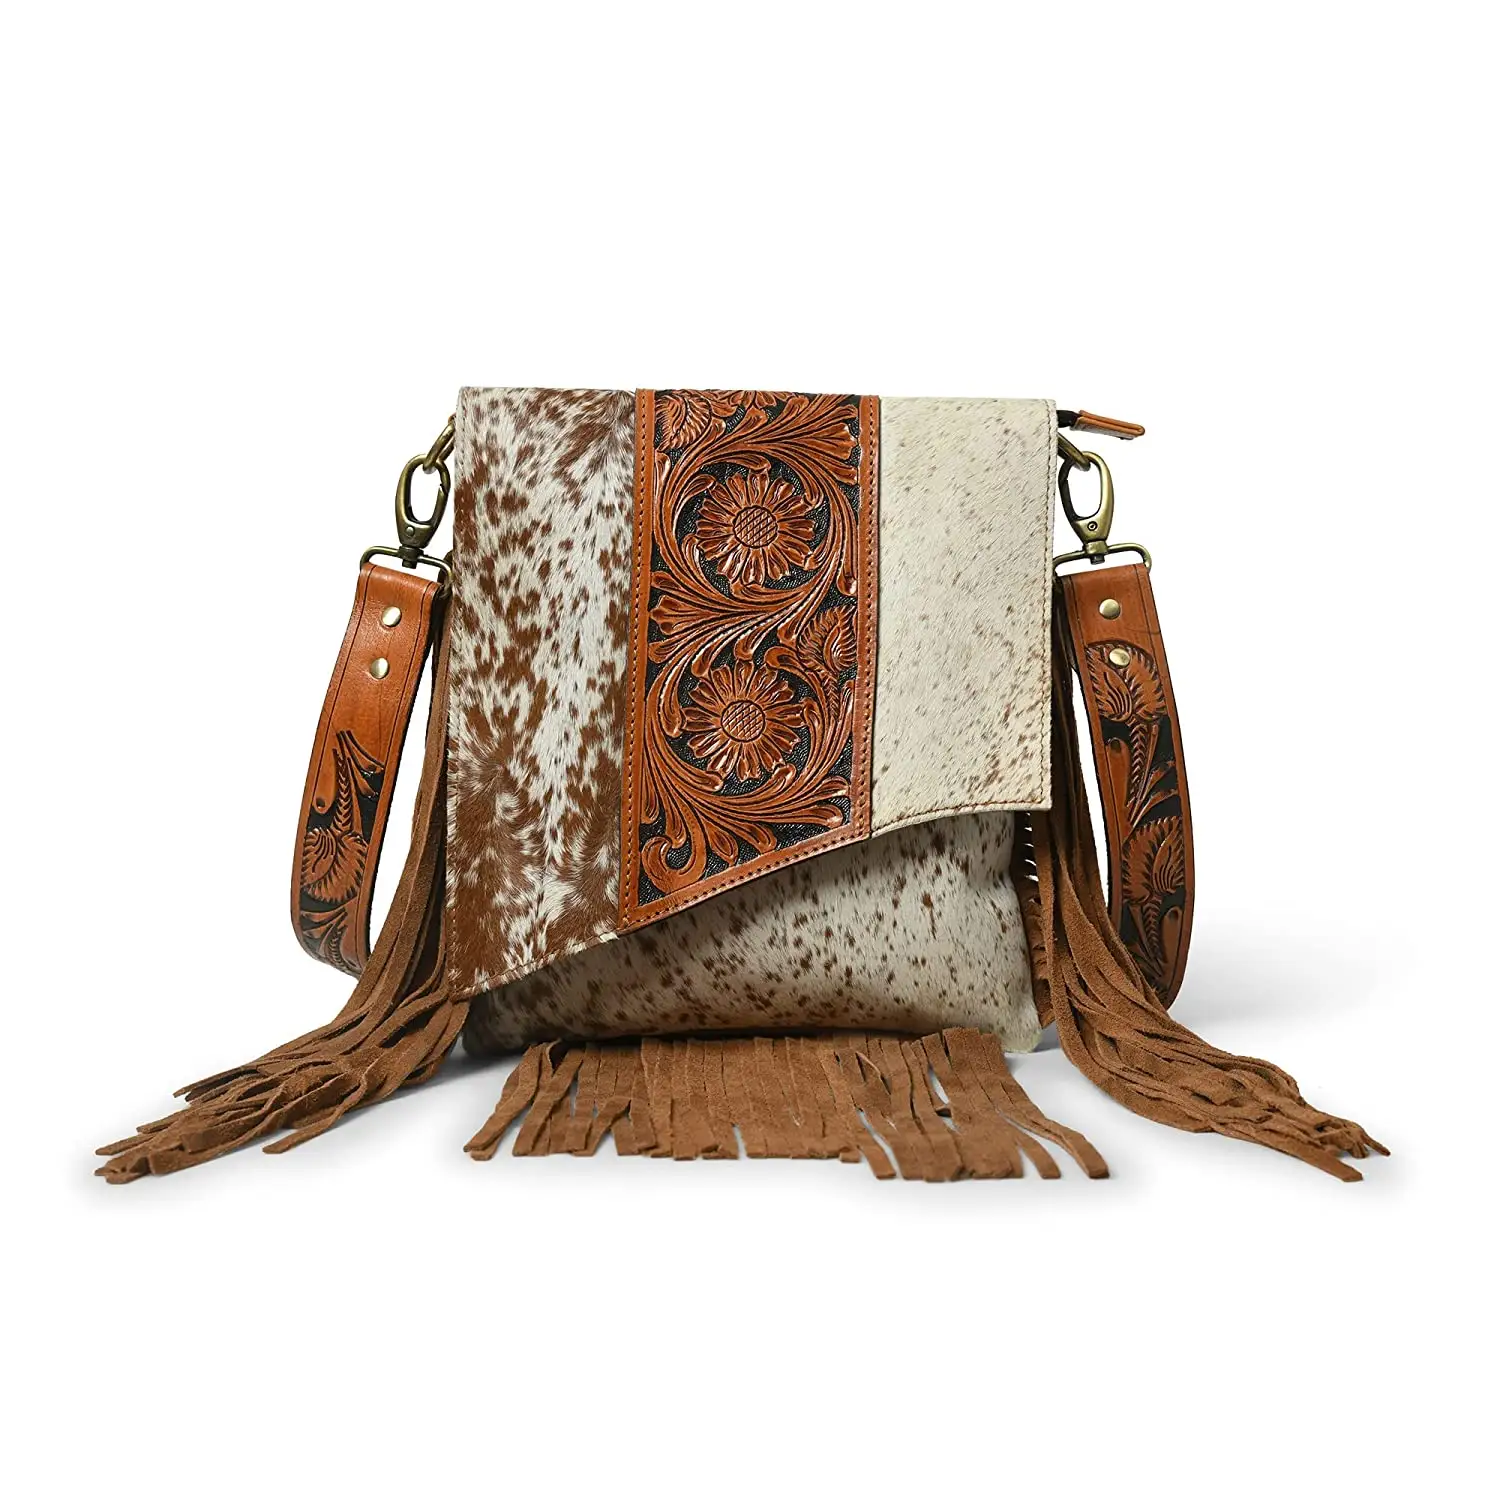 Western Leather Crossbody Bags for Women Sling Satchel Hand-tooled Floral Carving Bag Fringe Purse Conceal Carry Tan